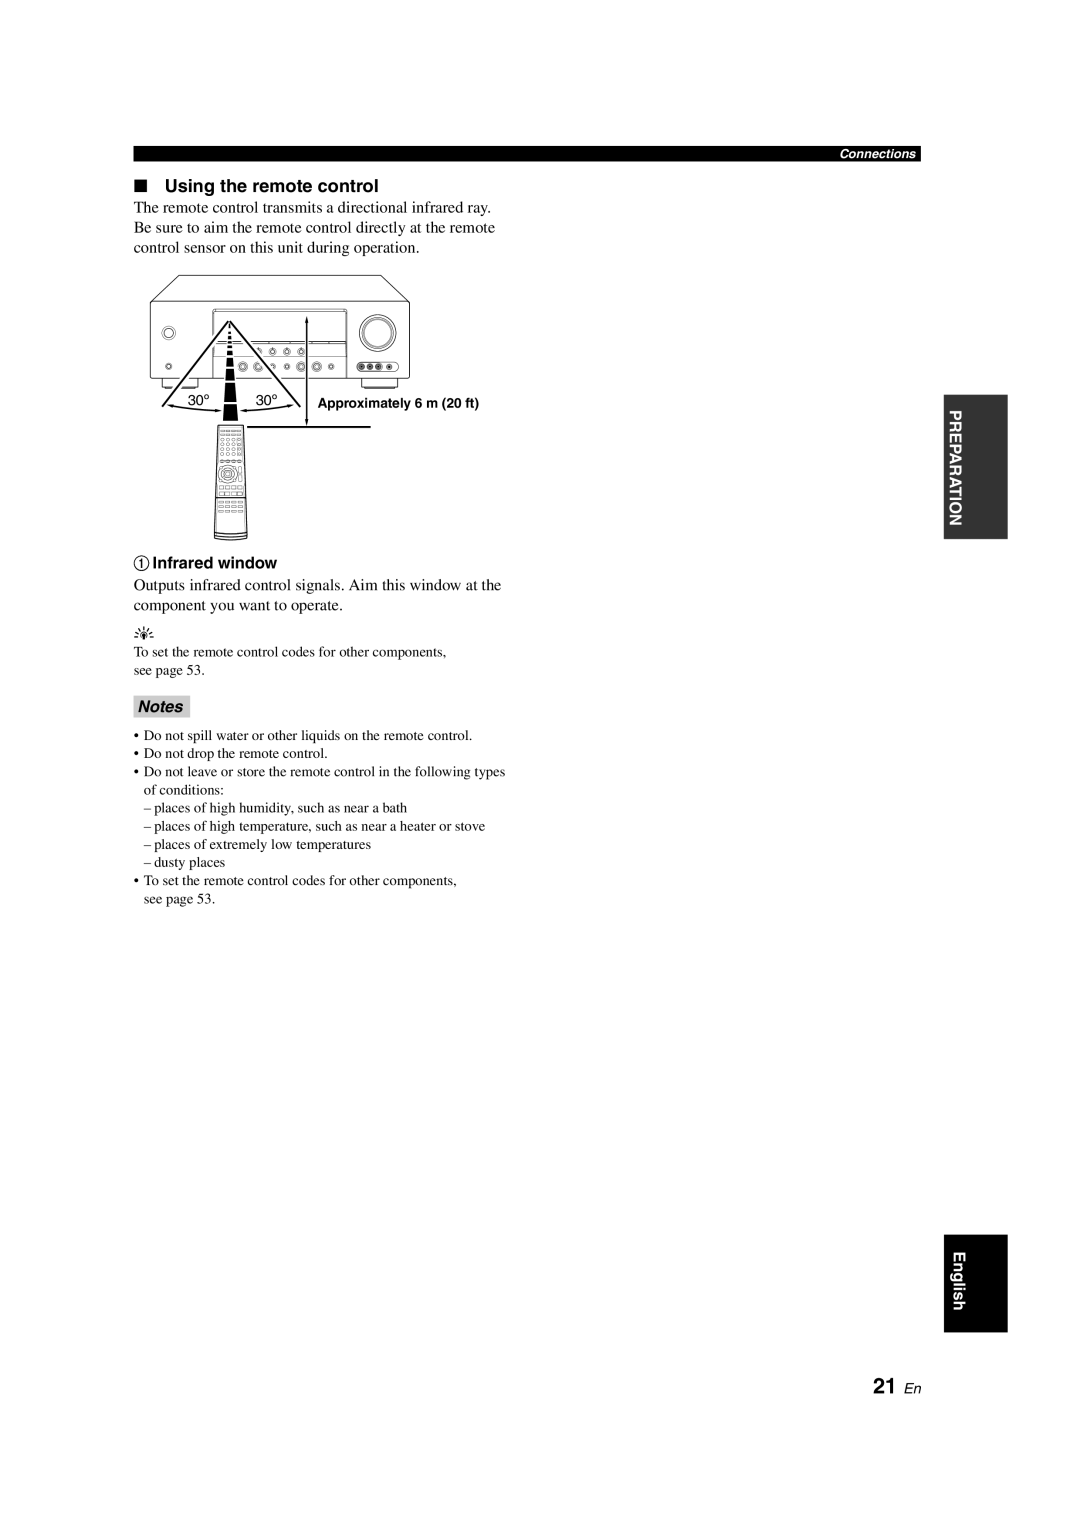 Yamaha HTR-6130 owner manual 21 En, Using the remote control 